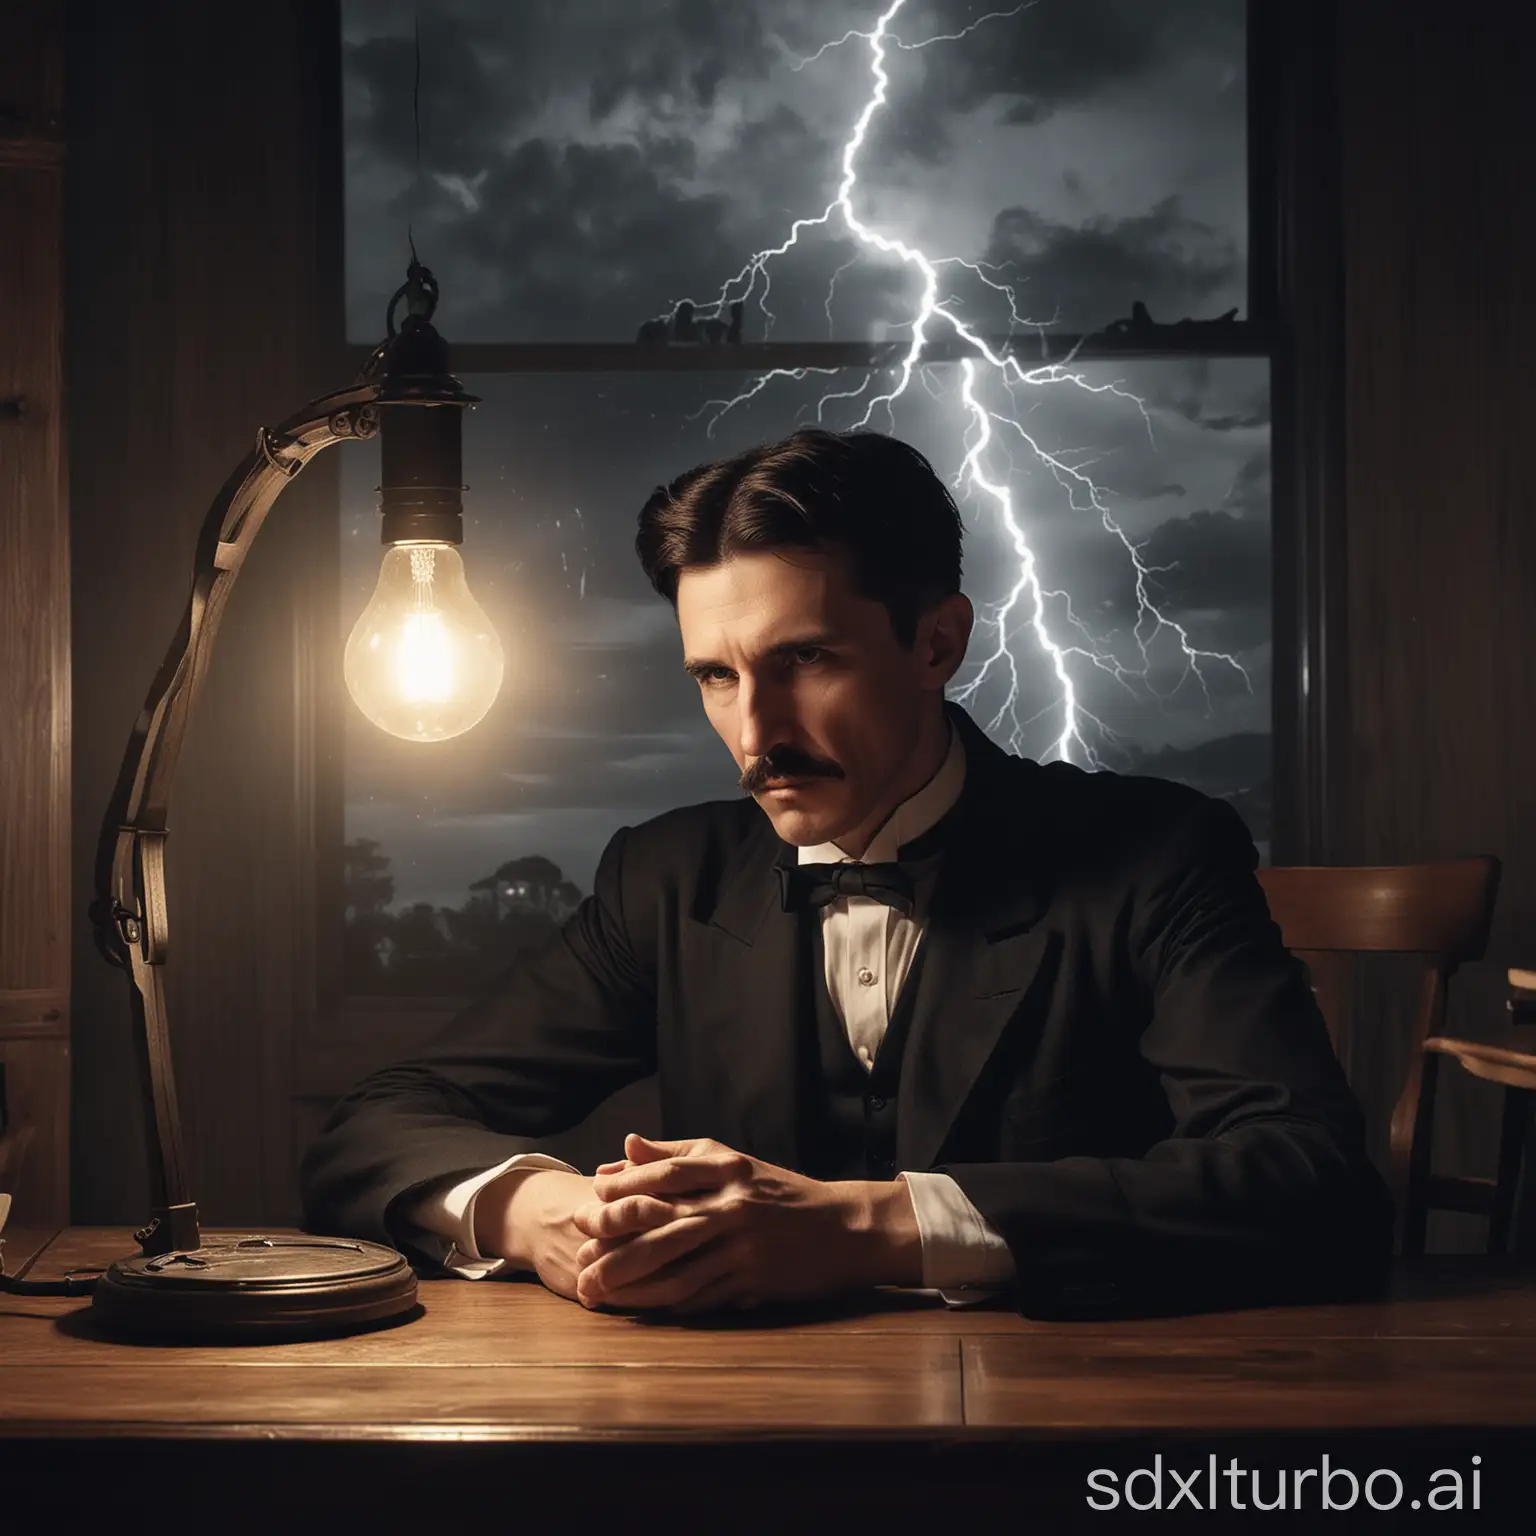 Create a moody and melancholic Discord profile picture featuring Nikola Tesla. Tesla is sitting at a wooden desk in a dimly lit room, with a vintage lamp shining above him. It's night, and outside the window behind him, there is a thunderstorm with lightning flashing. Tesla appears sad and depressed, reflecting the overall somber and gloomy atmosphere. The profile picture should evoke a sense of despair and darkness.